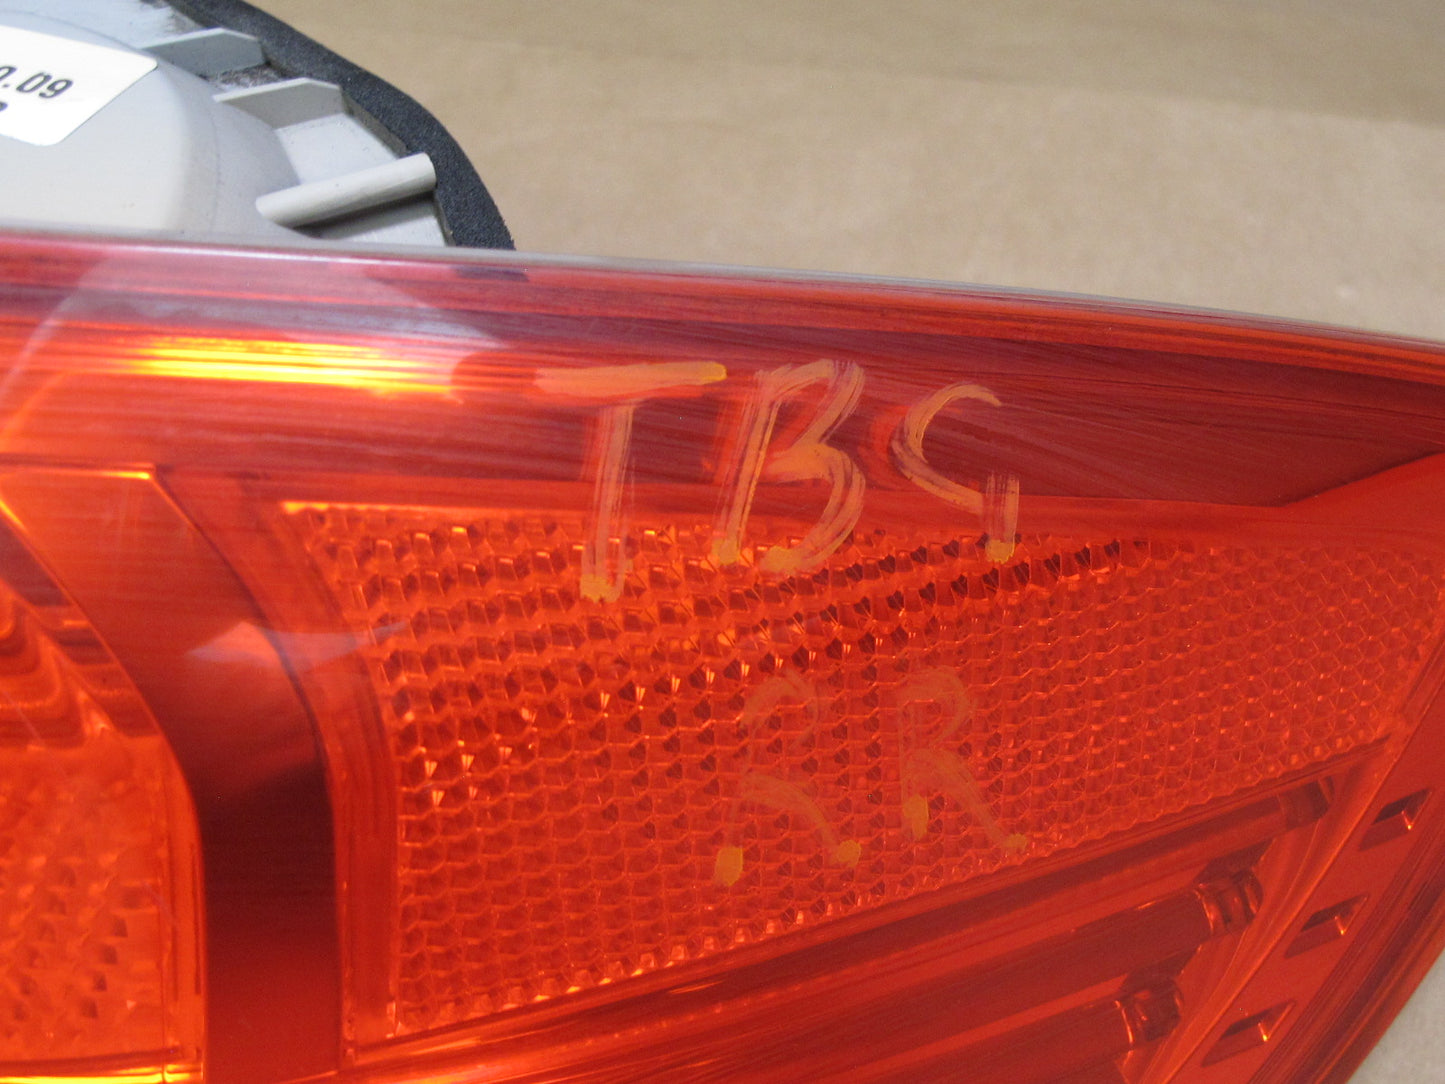 07-10 BMW E92 Coupe Rear Right Outer Tail Light Lamp 7174404 OEM